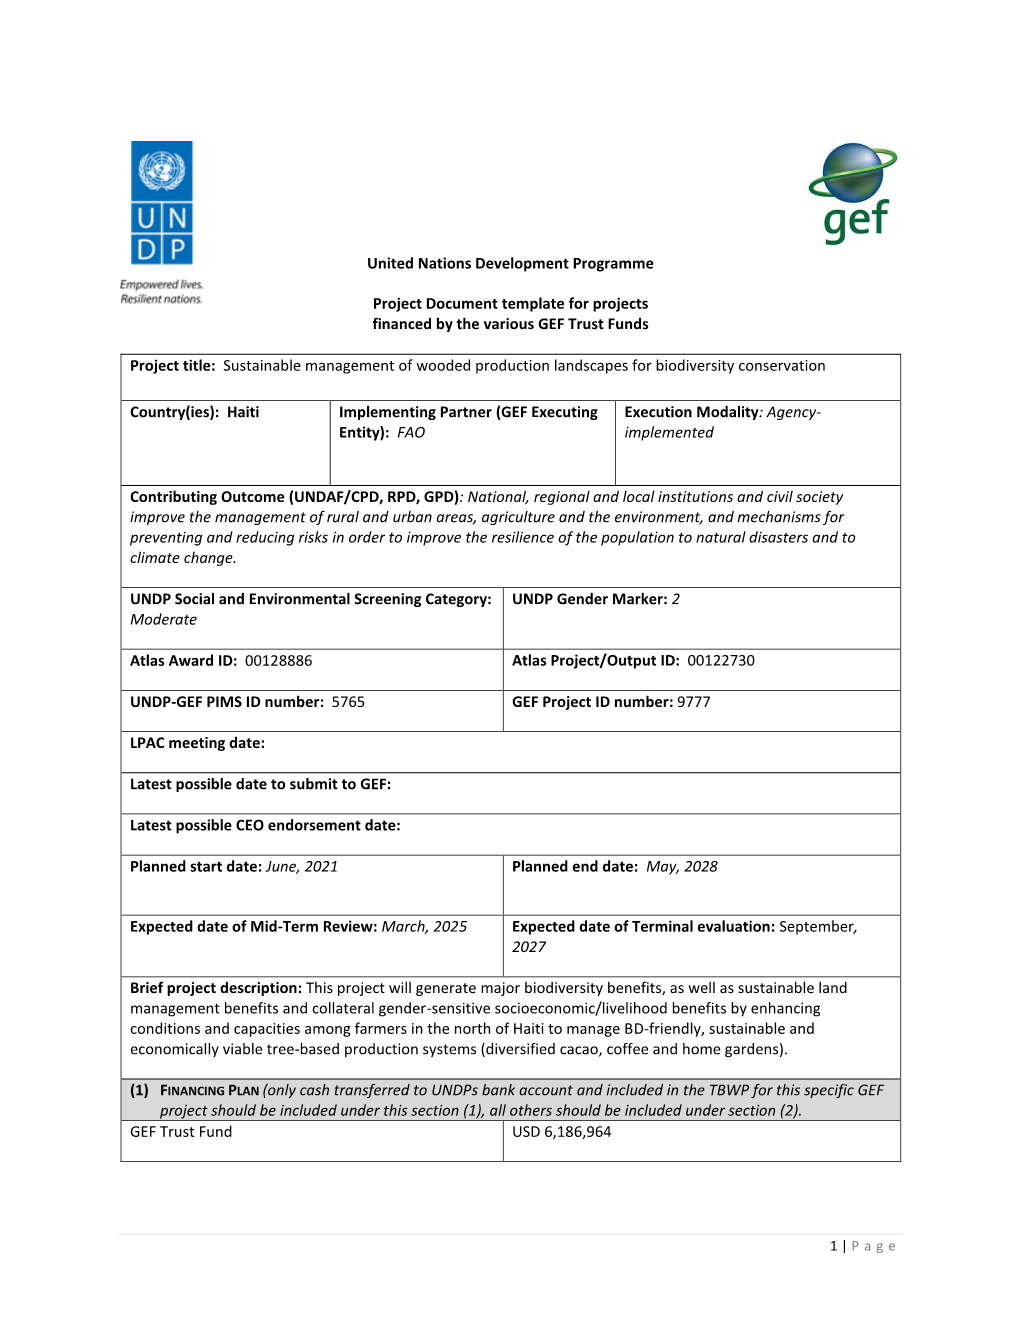 UNDP GEF Annotated Project Document Template